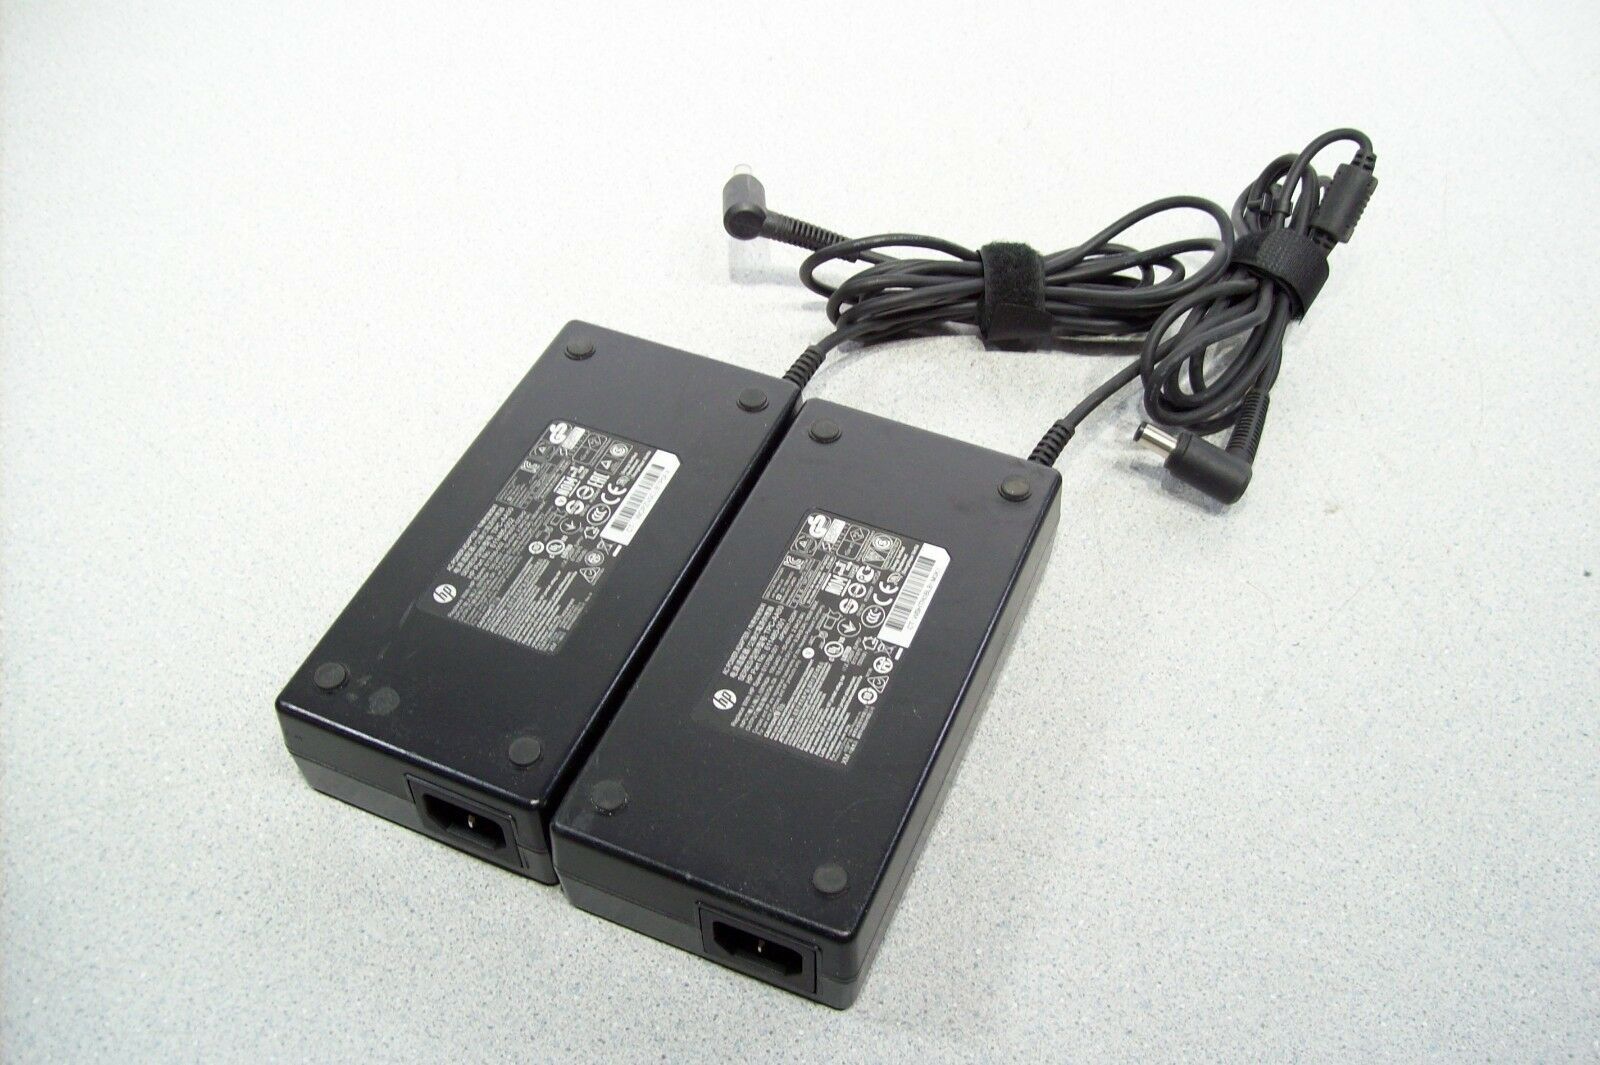 Lot of 2 Genuine HP 180W 19.5V 9.2A Power Supply Adapter 613766-001 611485-001